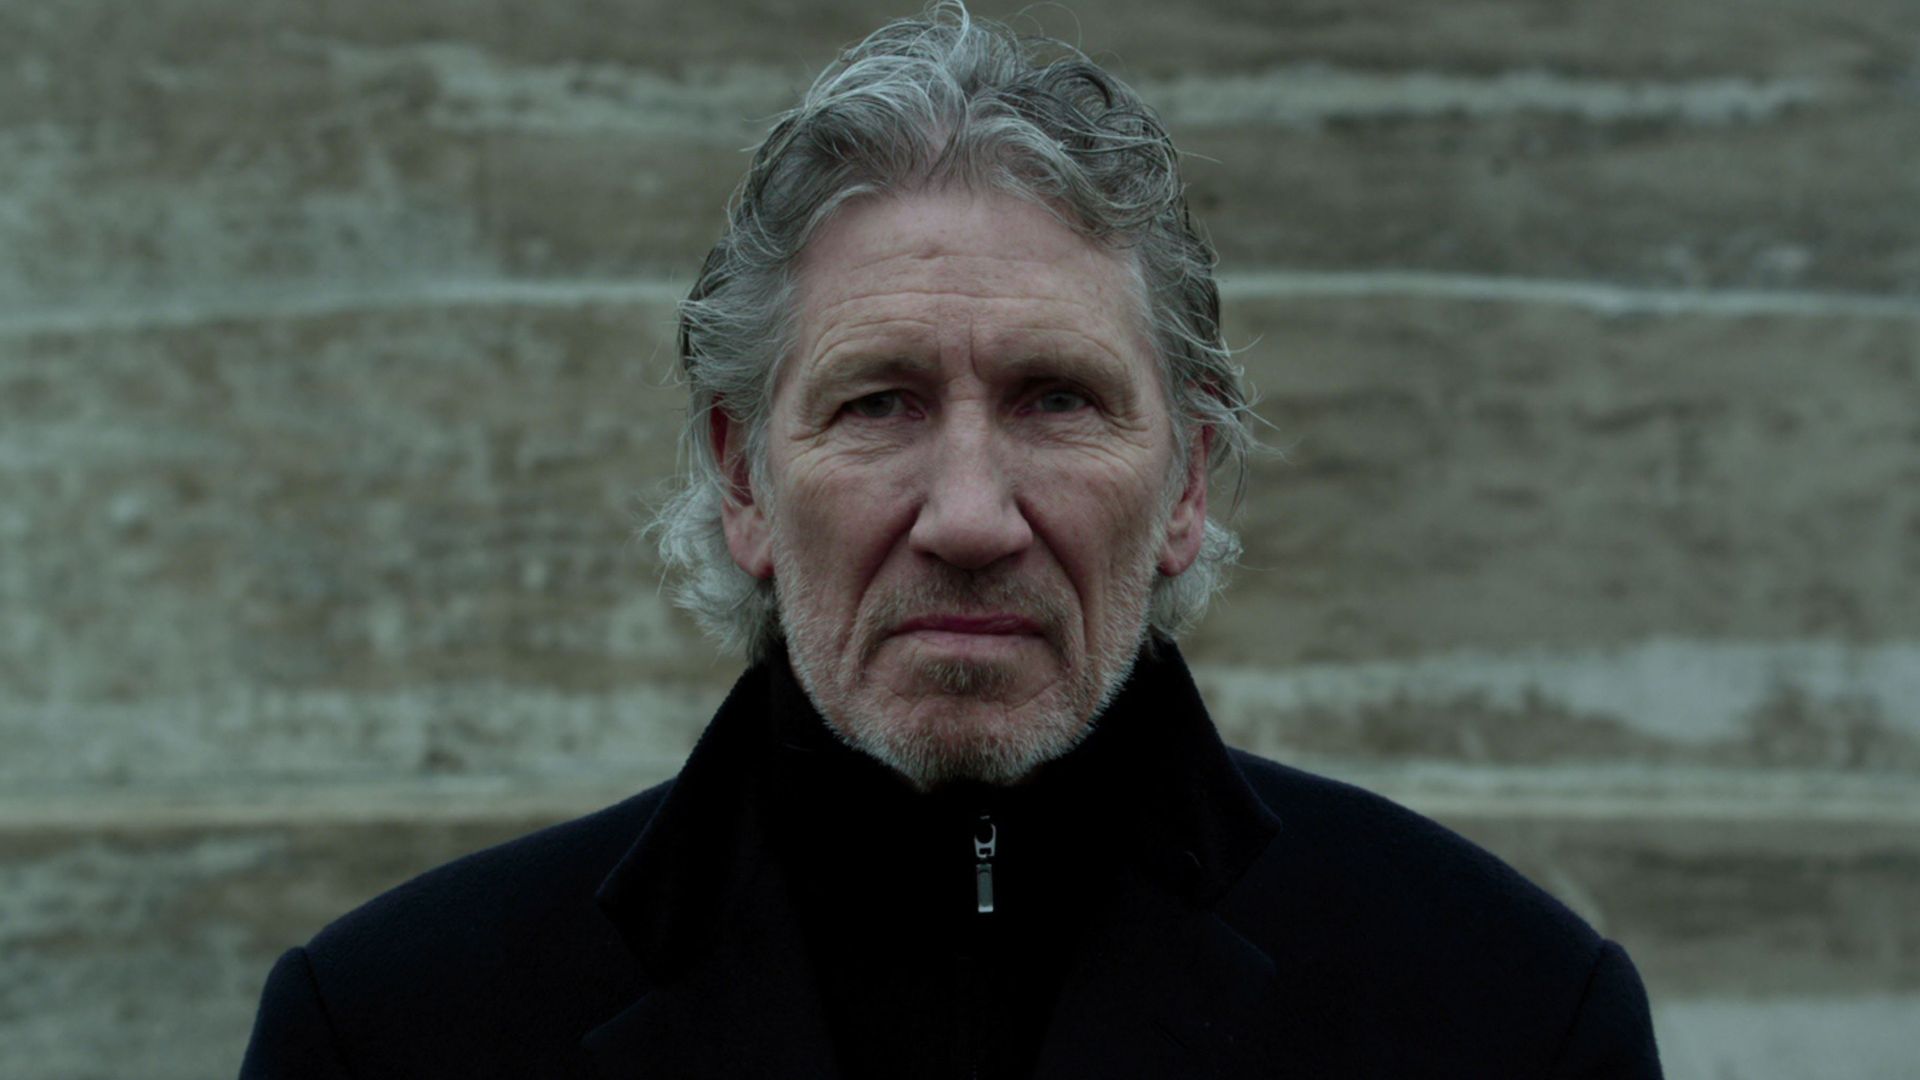 Roger Waters: The Wall (2015): Where to Watch and Stream Online